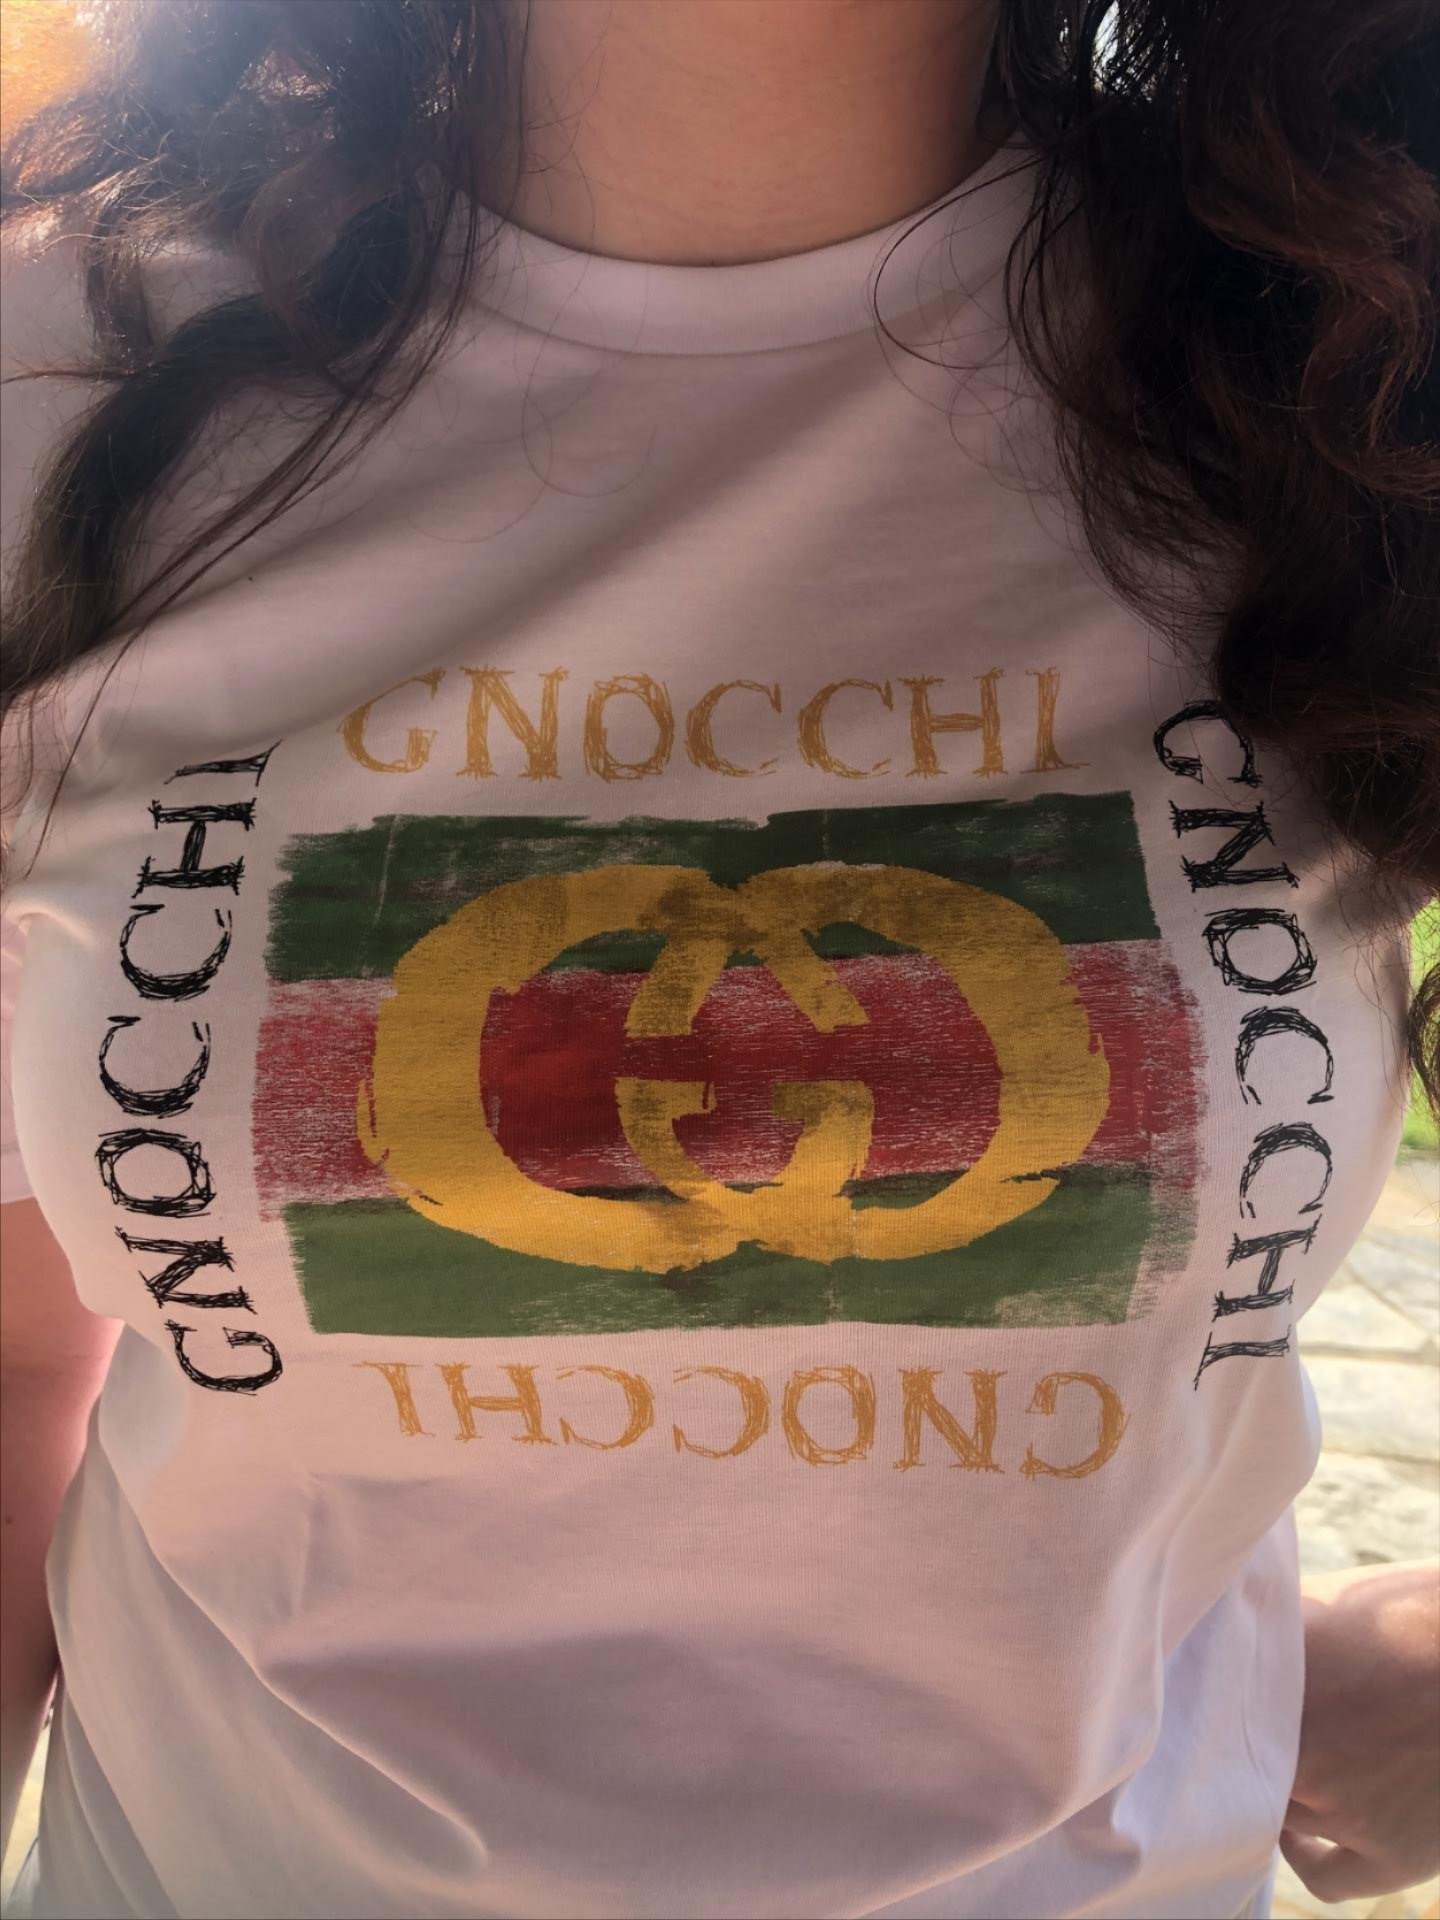 elizabeth wearing a white t-shirt reading &quot;gnocci&quot; in a gucci-like deisgn and font